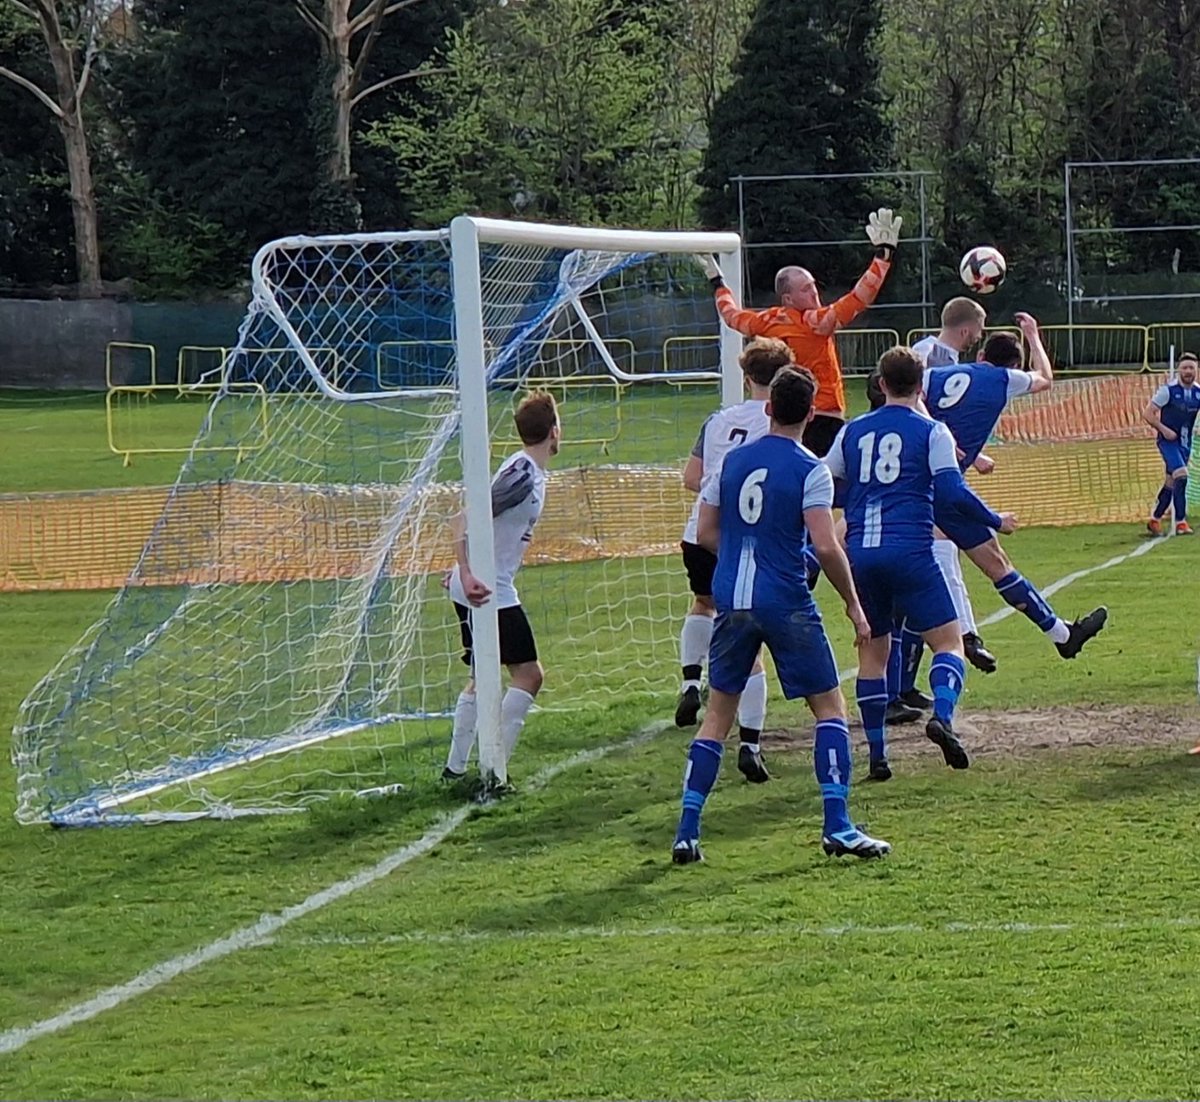 @SurreyPremierCF @worcesterparkfc @wimbledoncasual Here's what made it 2-1